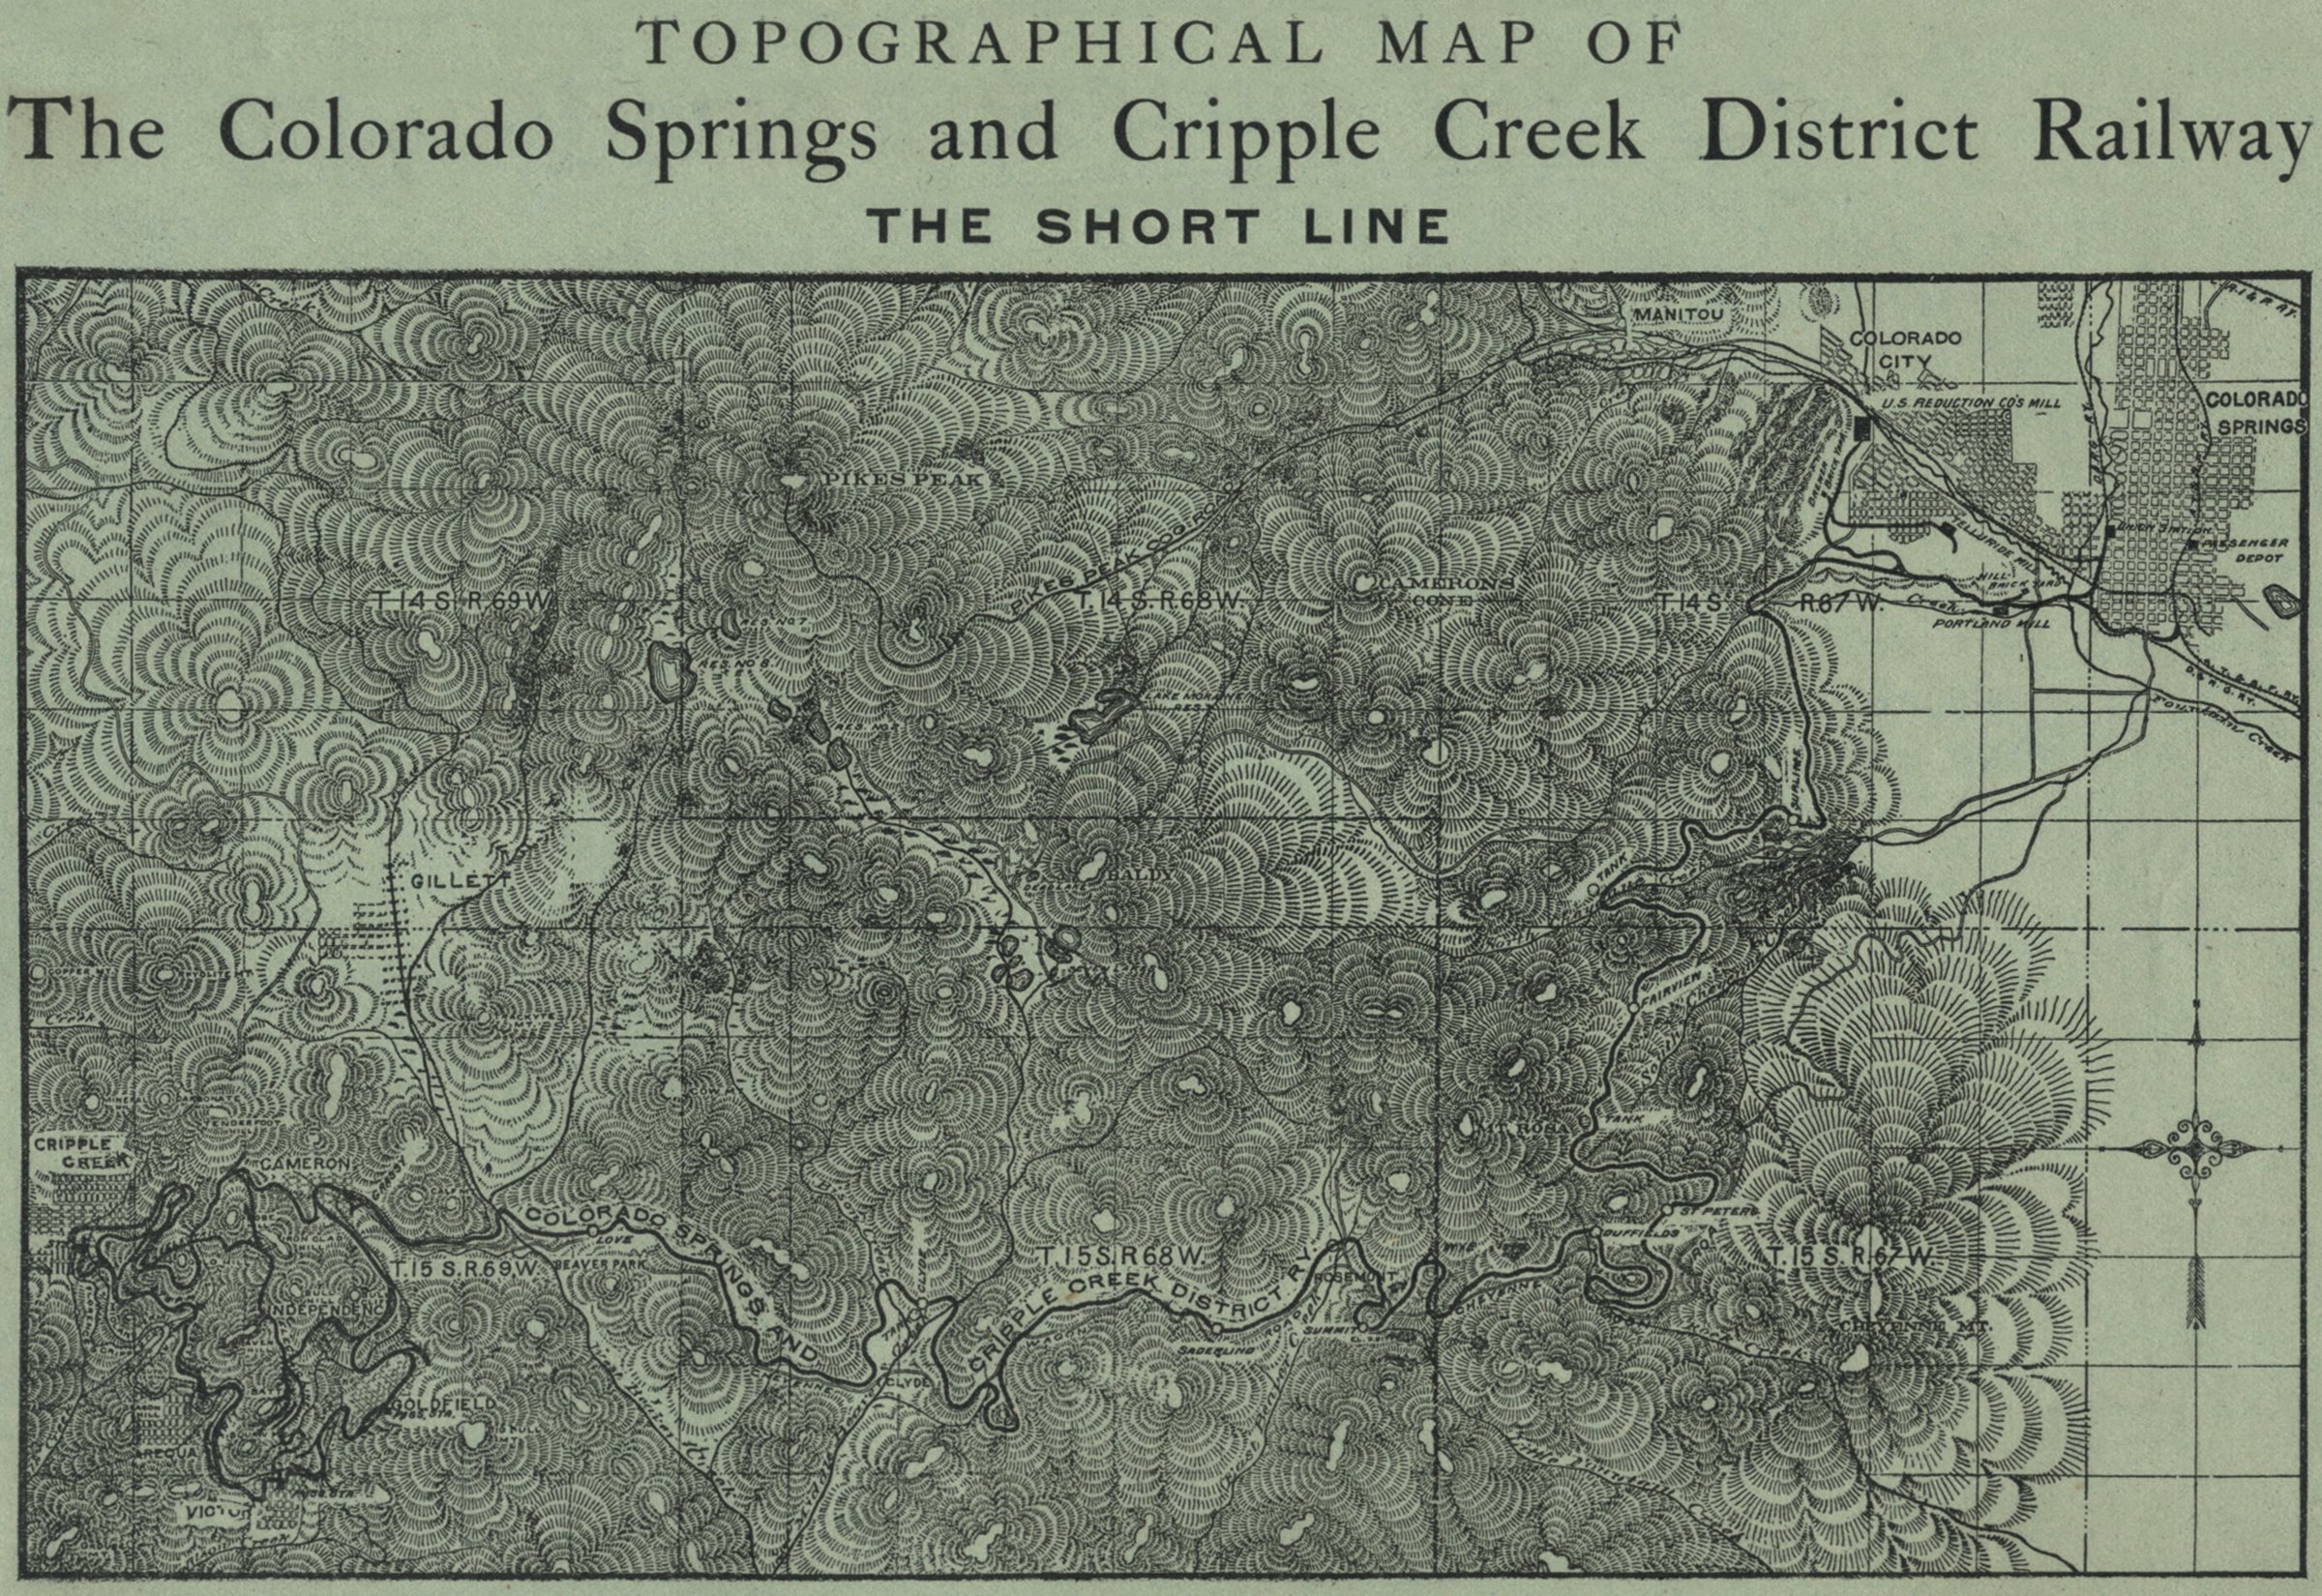 Topographical Map of The Colorado Springs and Cripple Creek District Railway - The Short Line